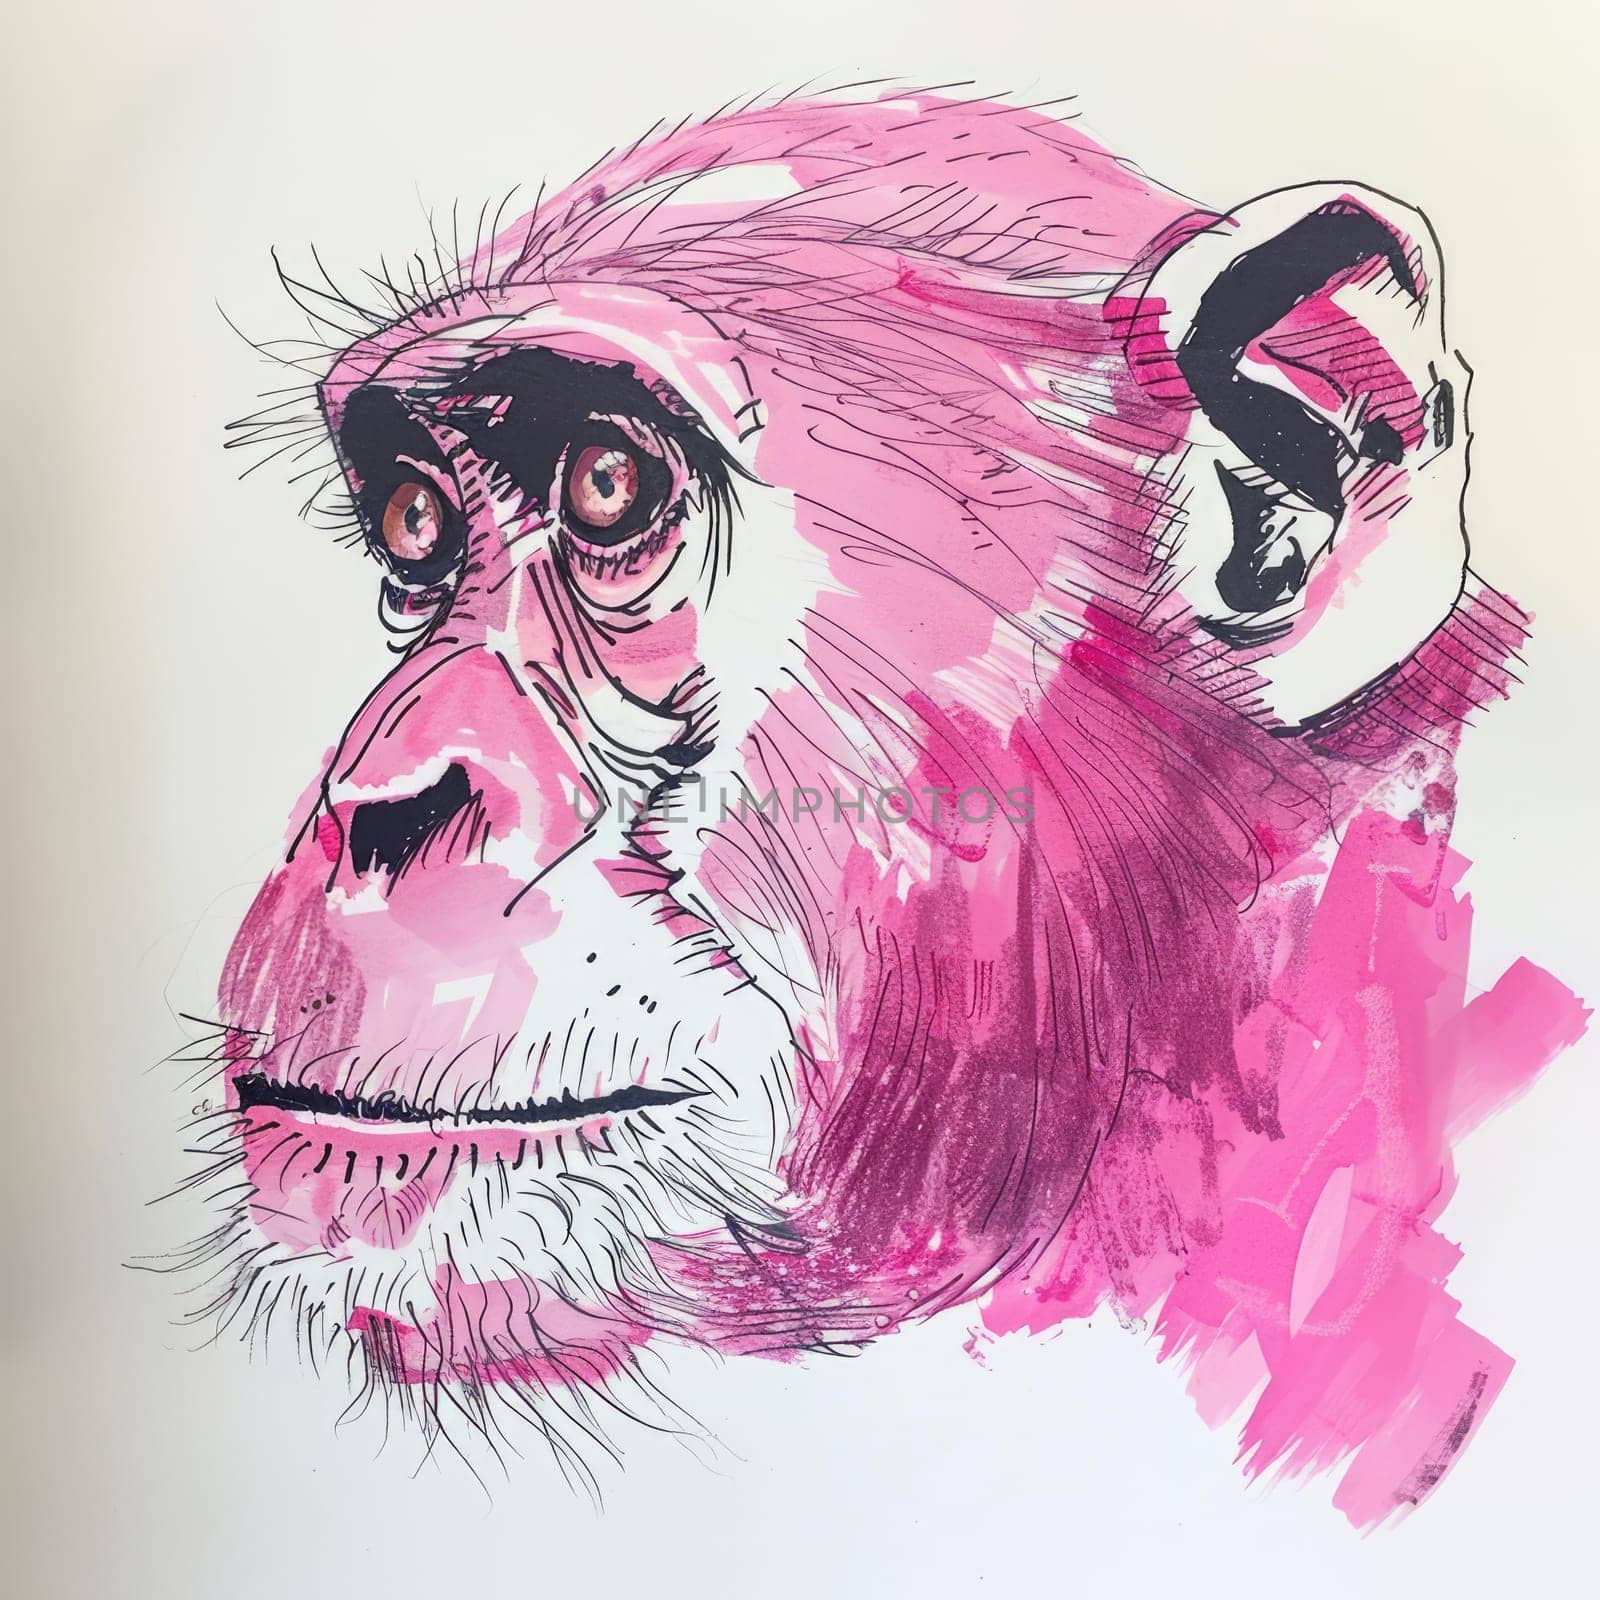 Drawing of a monkey made with a pink water marker on paper by natali_brill